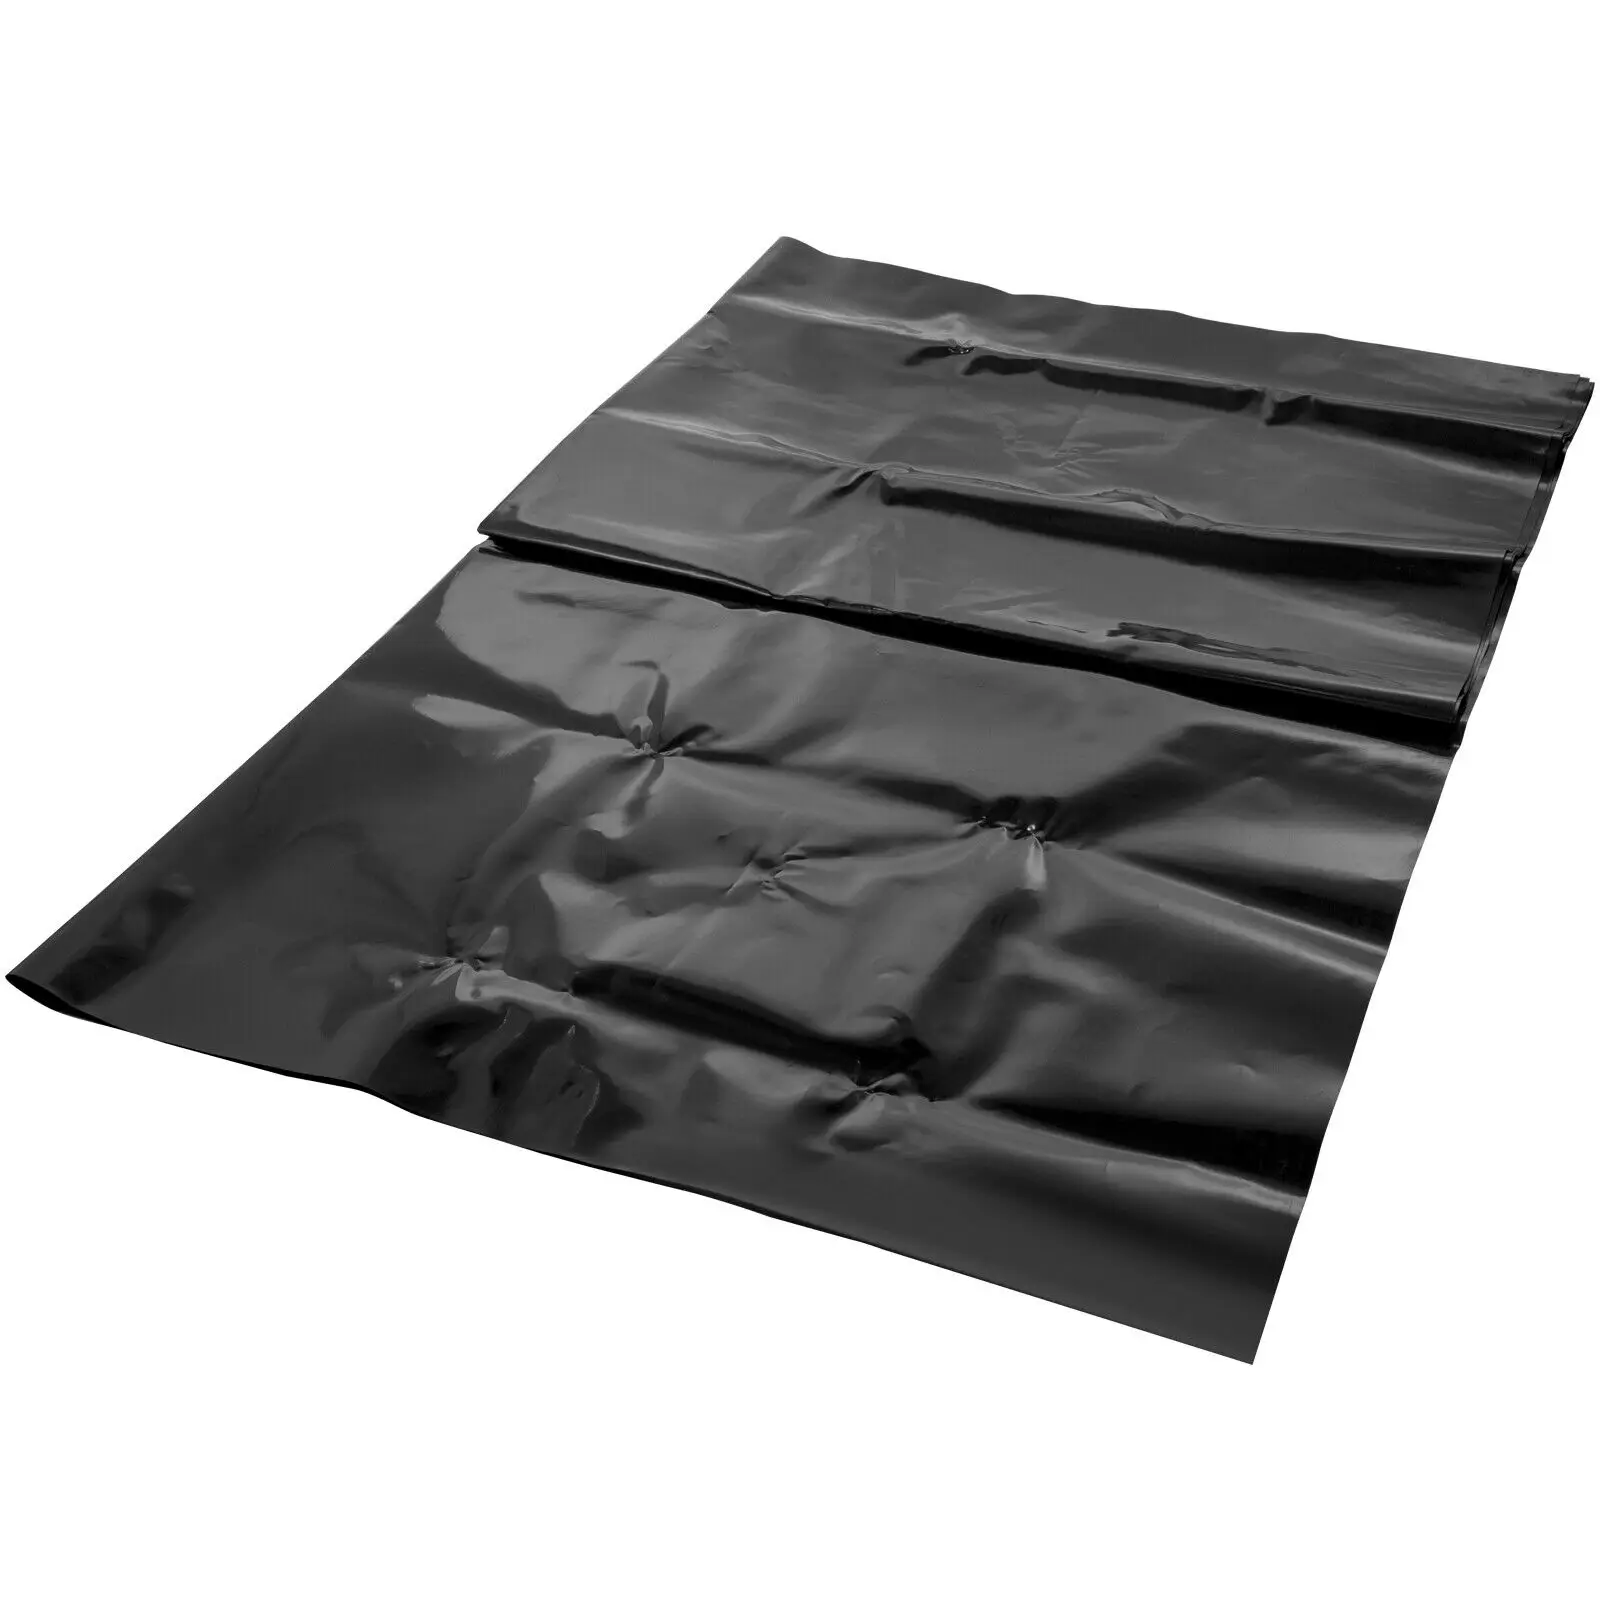 0.2mm Waterproof Liner film Fish Pond Liner Garden Pools Reinforced HDPE Heavy Duty Guaranty Landscaping Pool Pond 11X8M